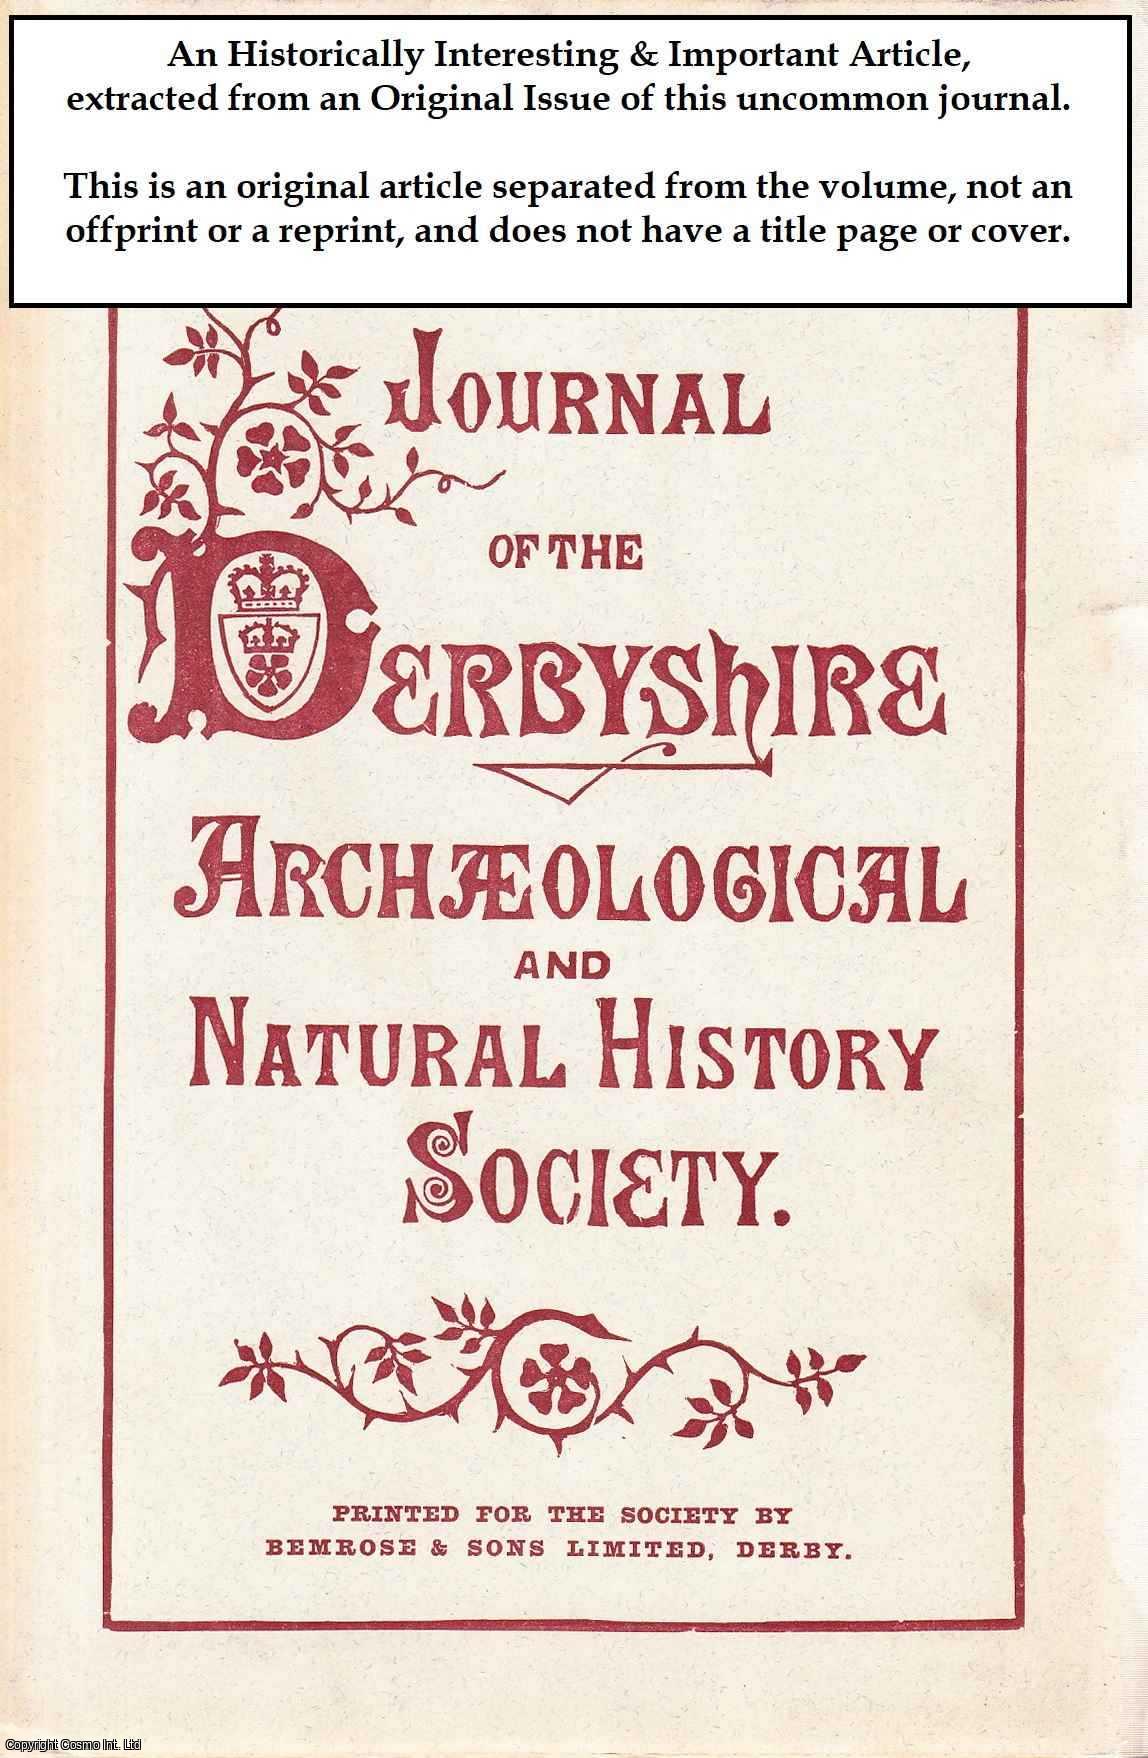 J. Charles Cox - An Alabaster Sculpture. An original article from the Journal of the Derbyshire Archaeological & Natural History Society, 1886.